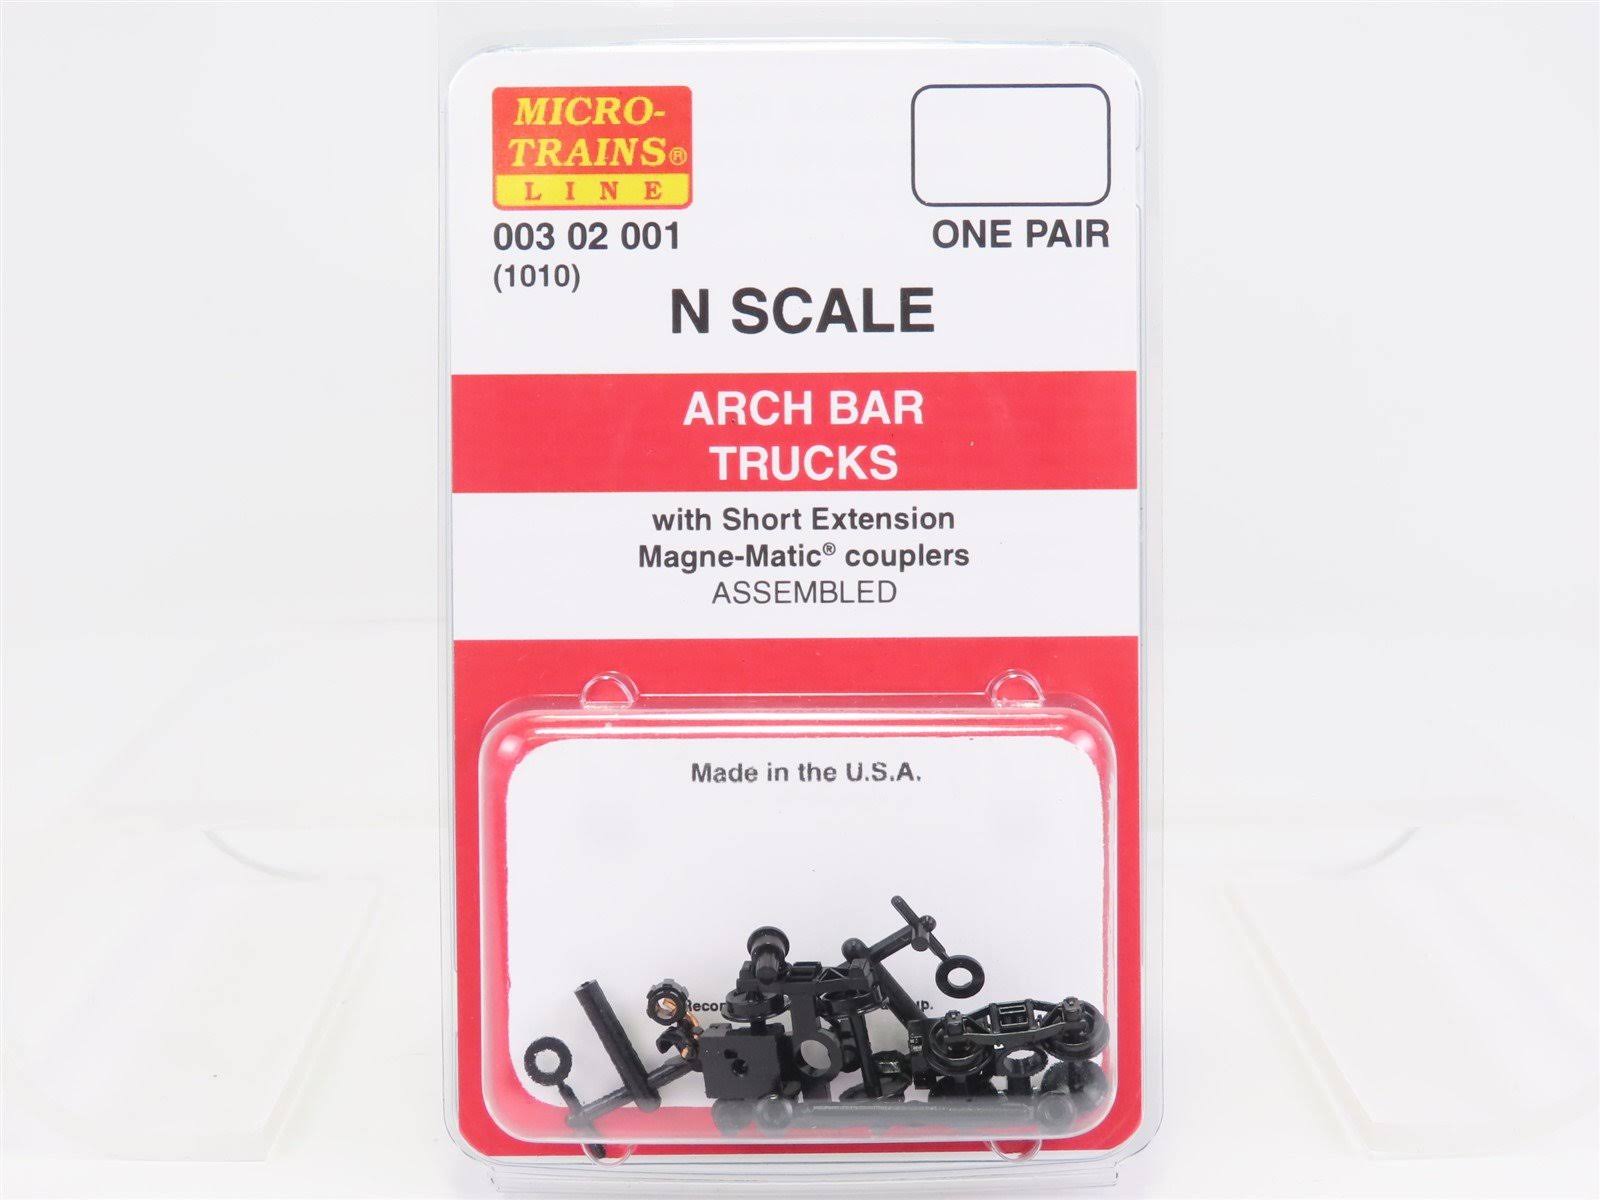 Micro Trains Archbar Truck N Scale with Short Extension 00302001